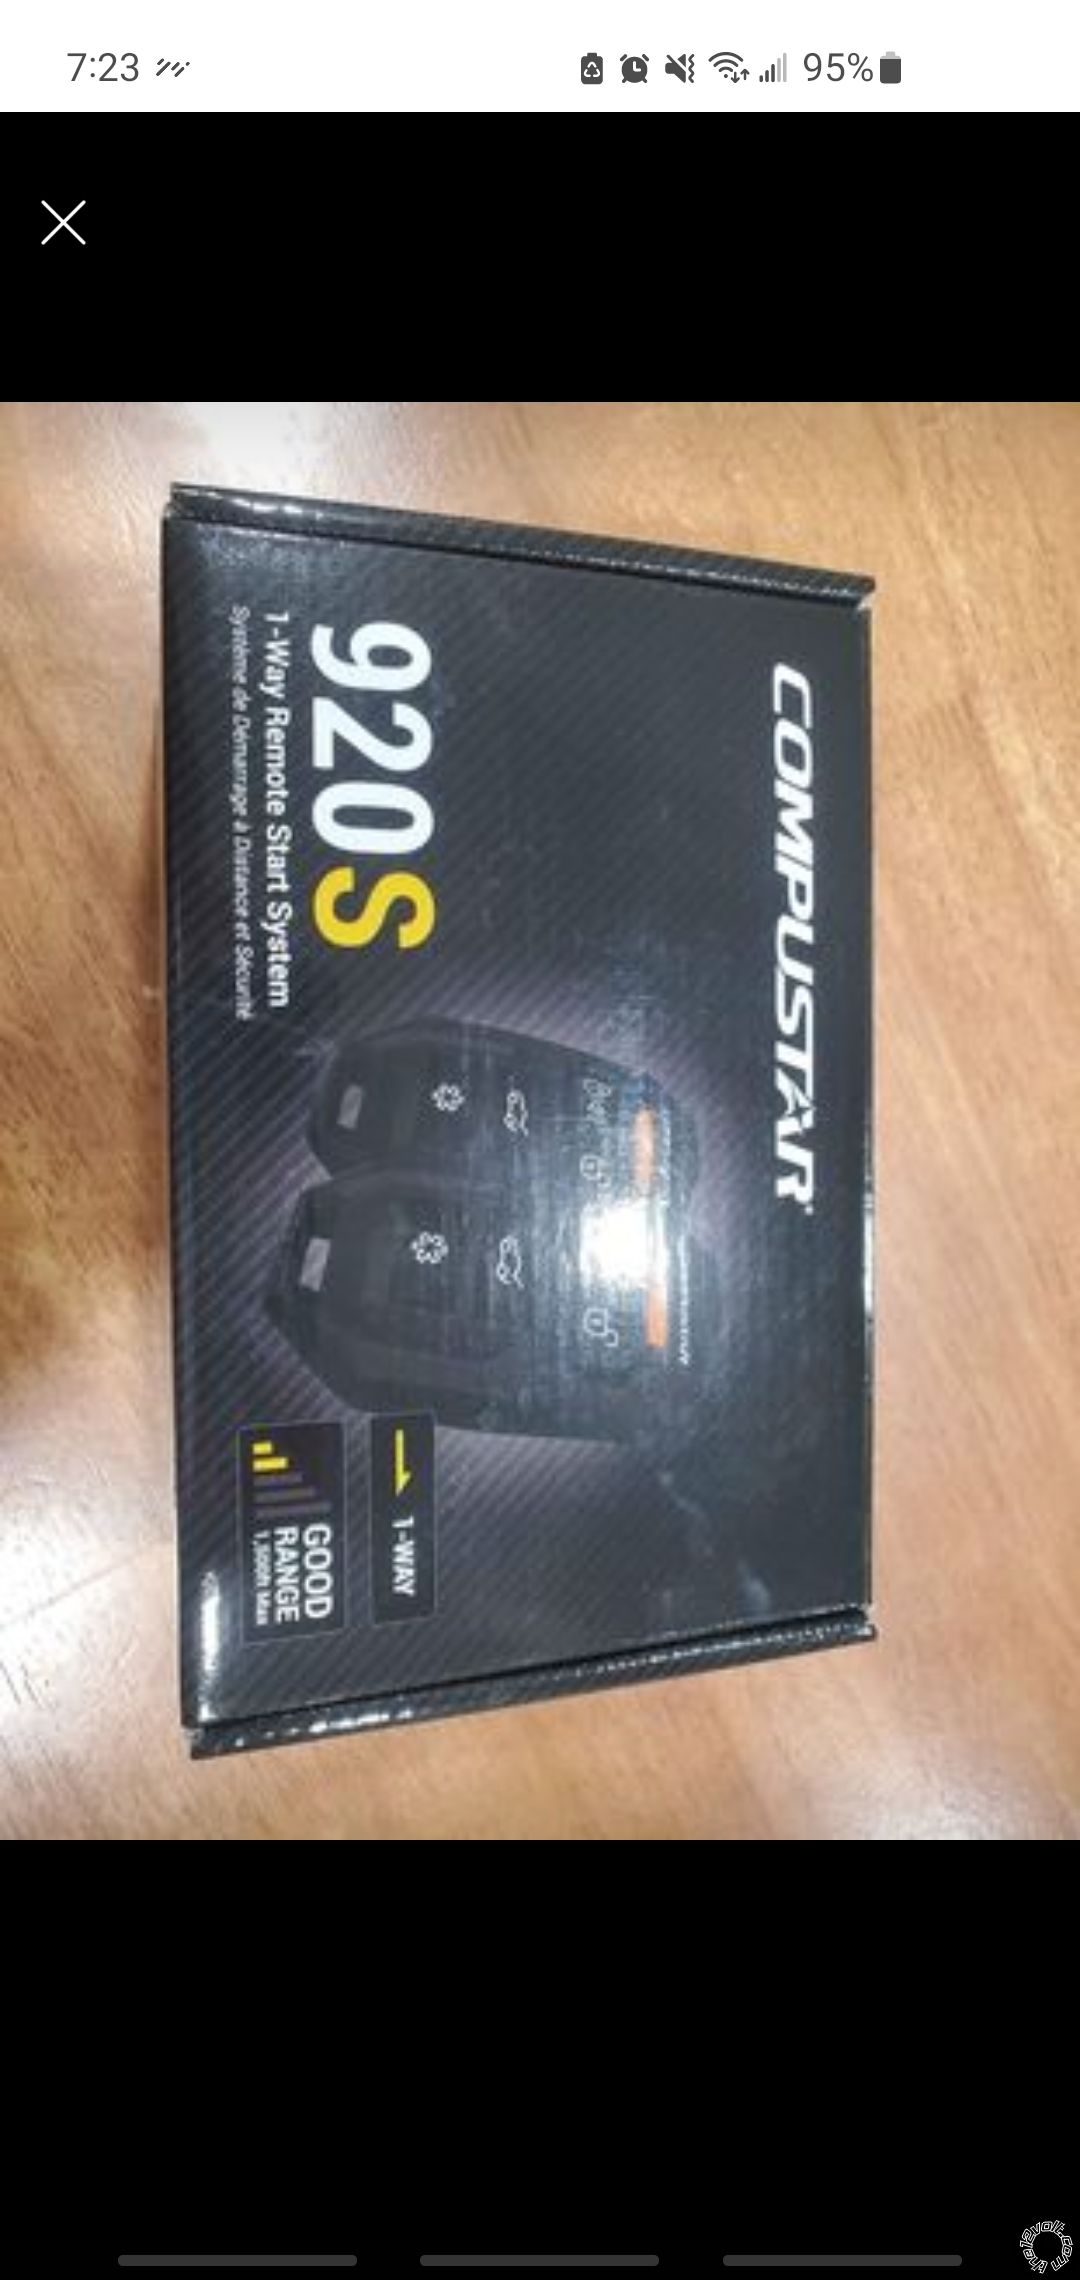 For Sale, Compustar 920S Remote Starter - Last Post -- posted image.